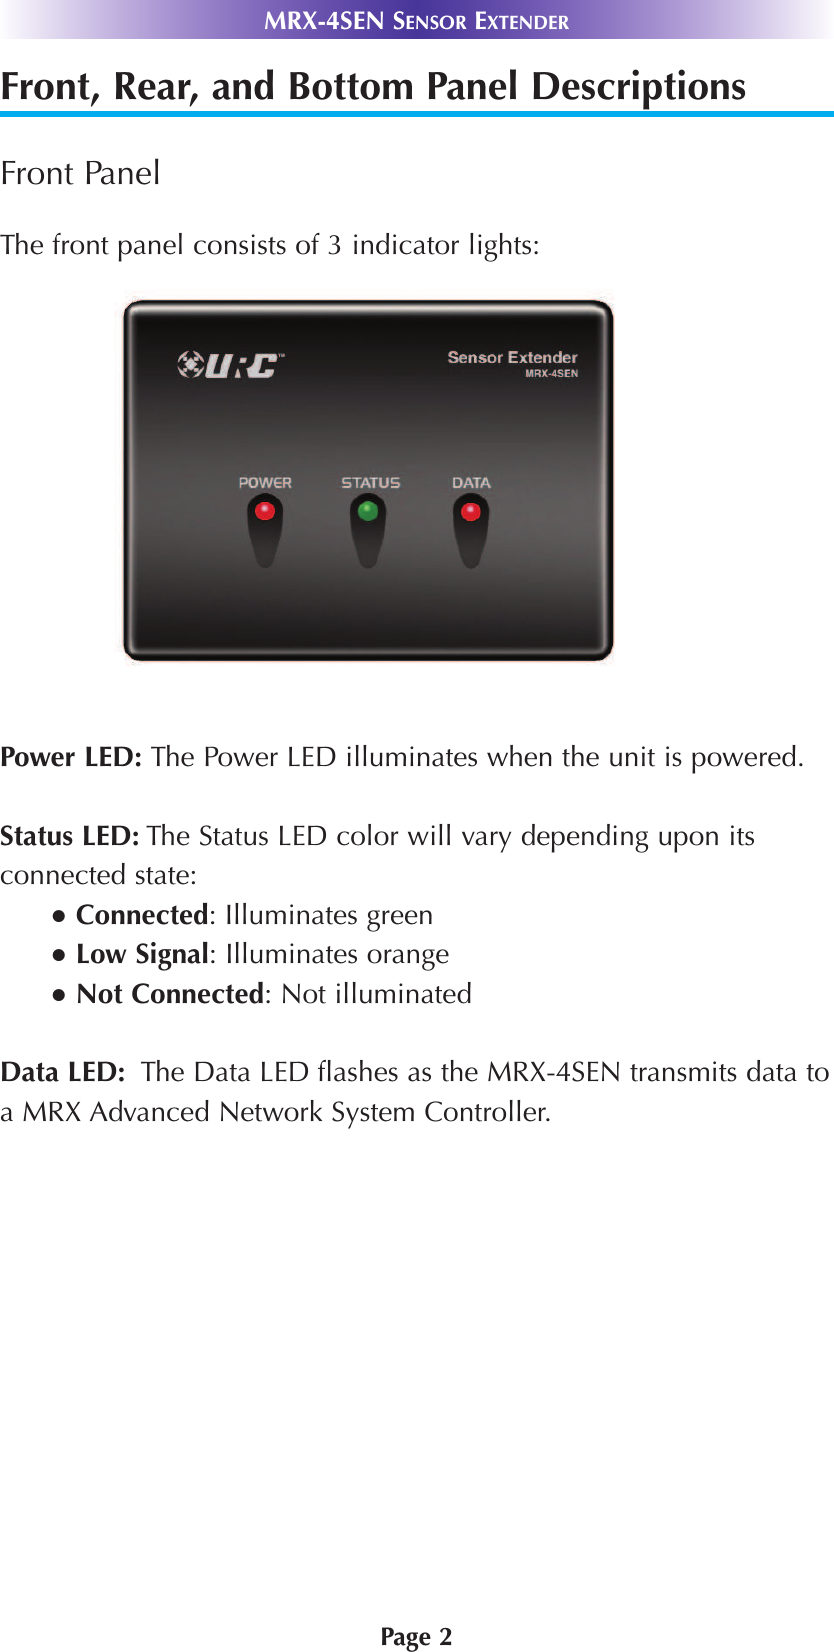 Page 2MRX-4SEN SENSOR EXTENDERFront, Rear, and Bottom Panel DescriptionsFront PanelThe front panel consists of 3 indicator lights: Power LED: The Power LED illuminates when the unit is powered.Status LED: The Status LED color will vary depending upon itsconnected state:  ●Connected: Illuminates green ●Low Signal: Illuminates orange ●Not Connected: Not illuminatedData LED:  The Data LED flashes as the MRX-4SEN transmits data toa MRX Advanced Network System Controller. 